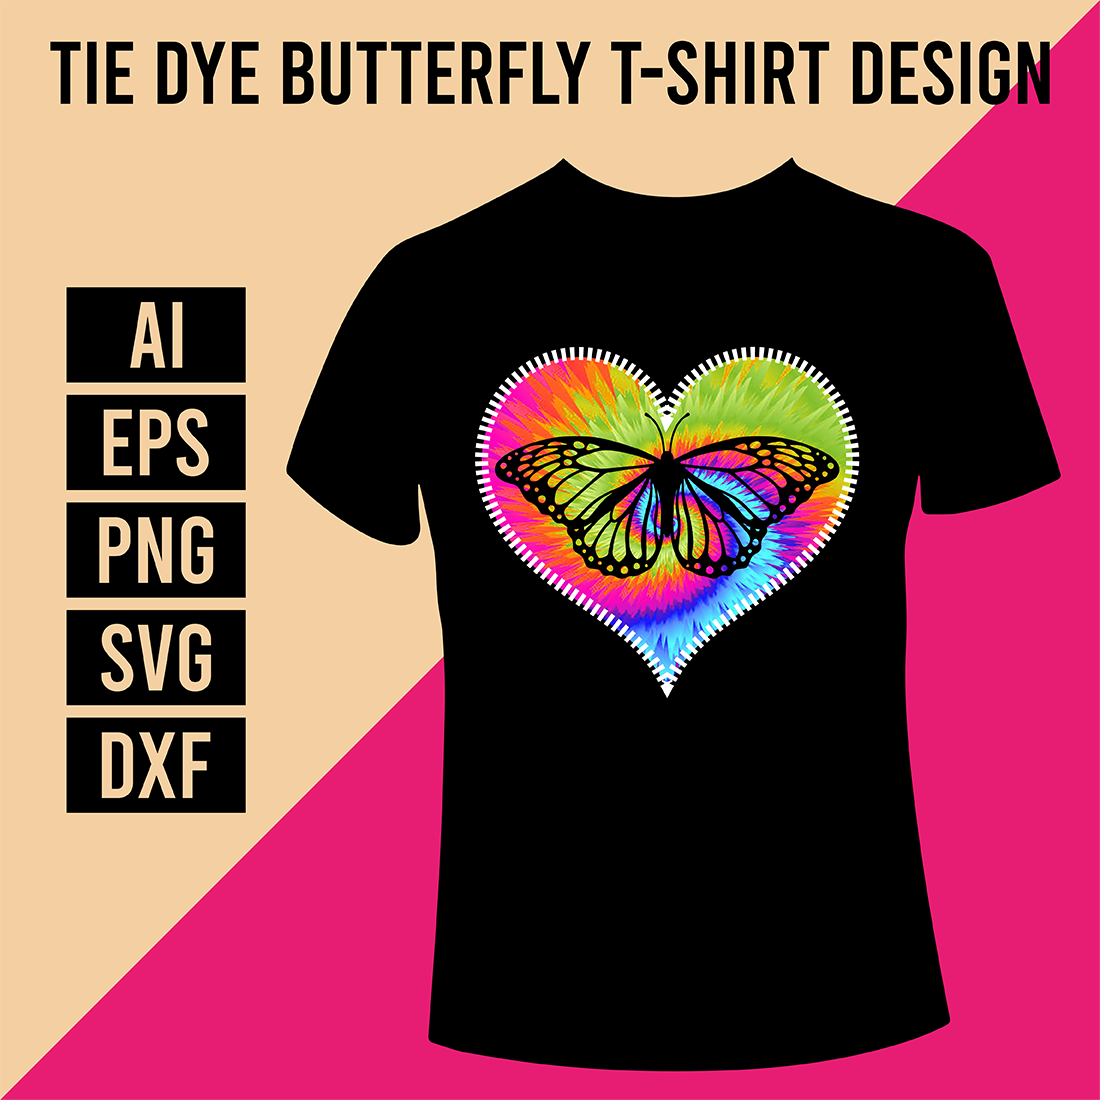 Tie Dye Butterfly T-Shirt Design cover image.